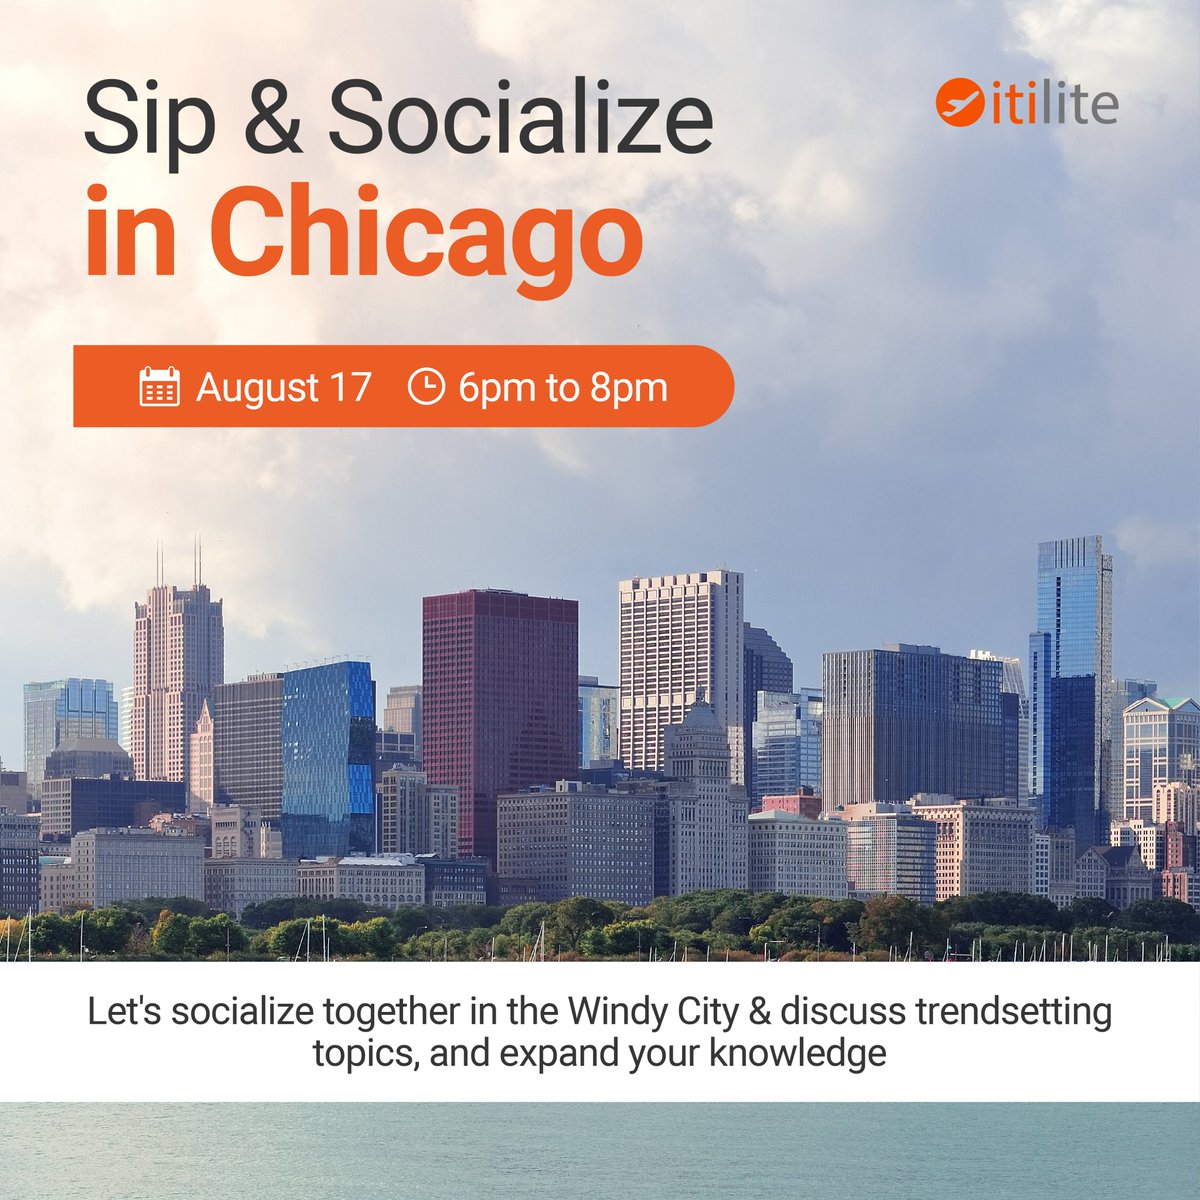 Join us for an unforgettable networking experience at Sip and Socialize! Secure your spot now  August 17th Chicago - lnkd.in/dKRutVEG August 24th New York - lnkd.in/dTYdDsc7 #itilite #BusinessTravel #TravelSolutions #TravelSmart #TravelManagers #SipAndSocialize